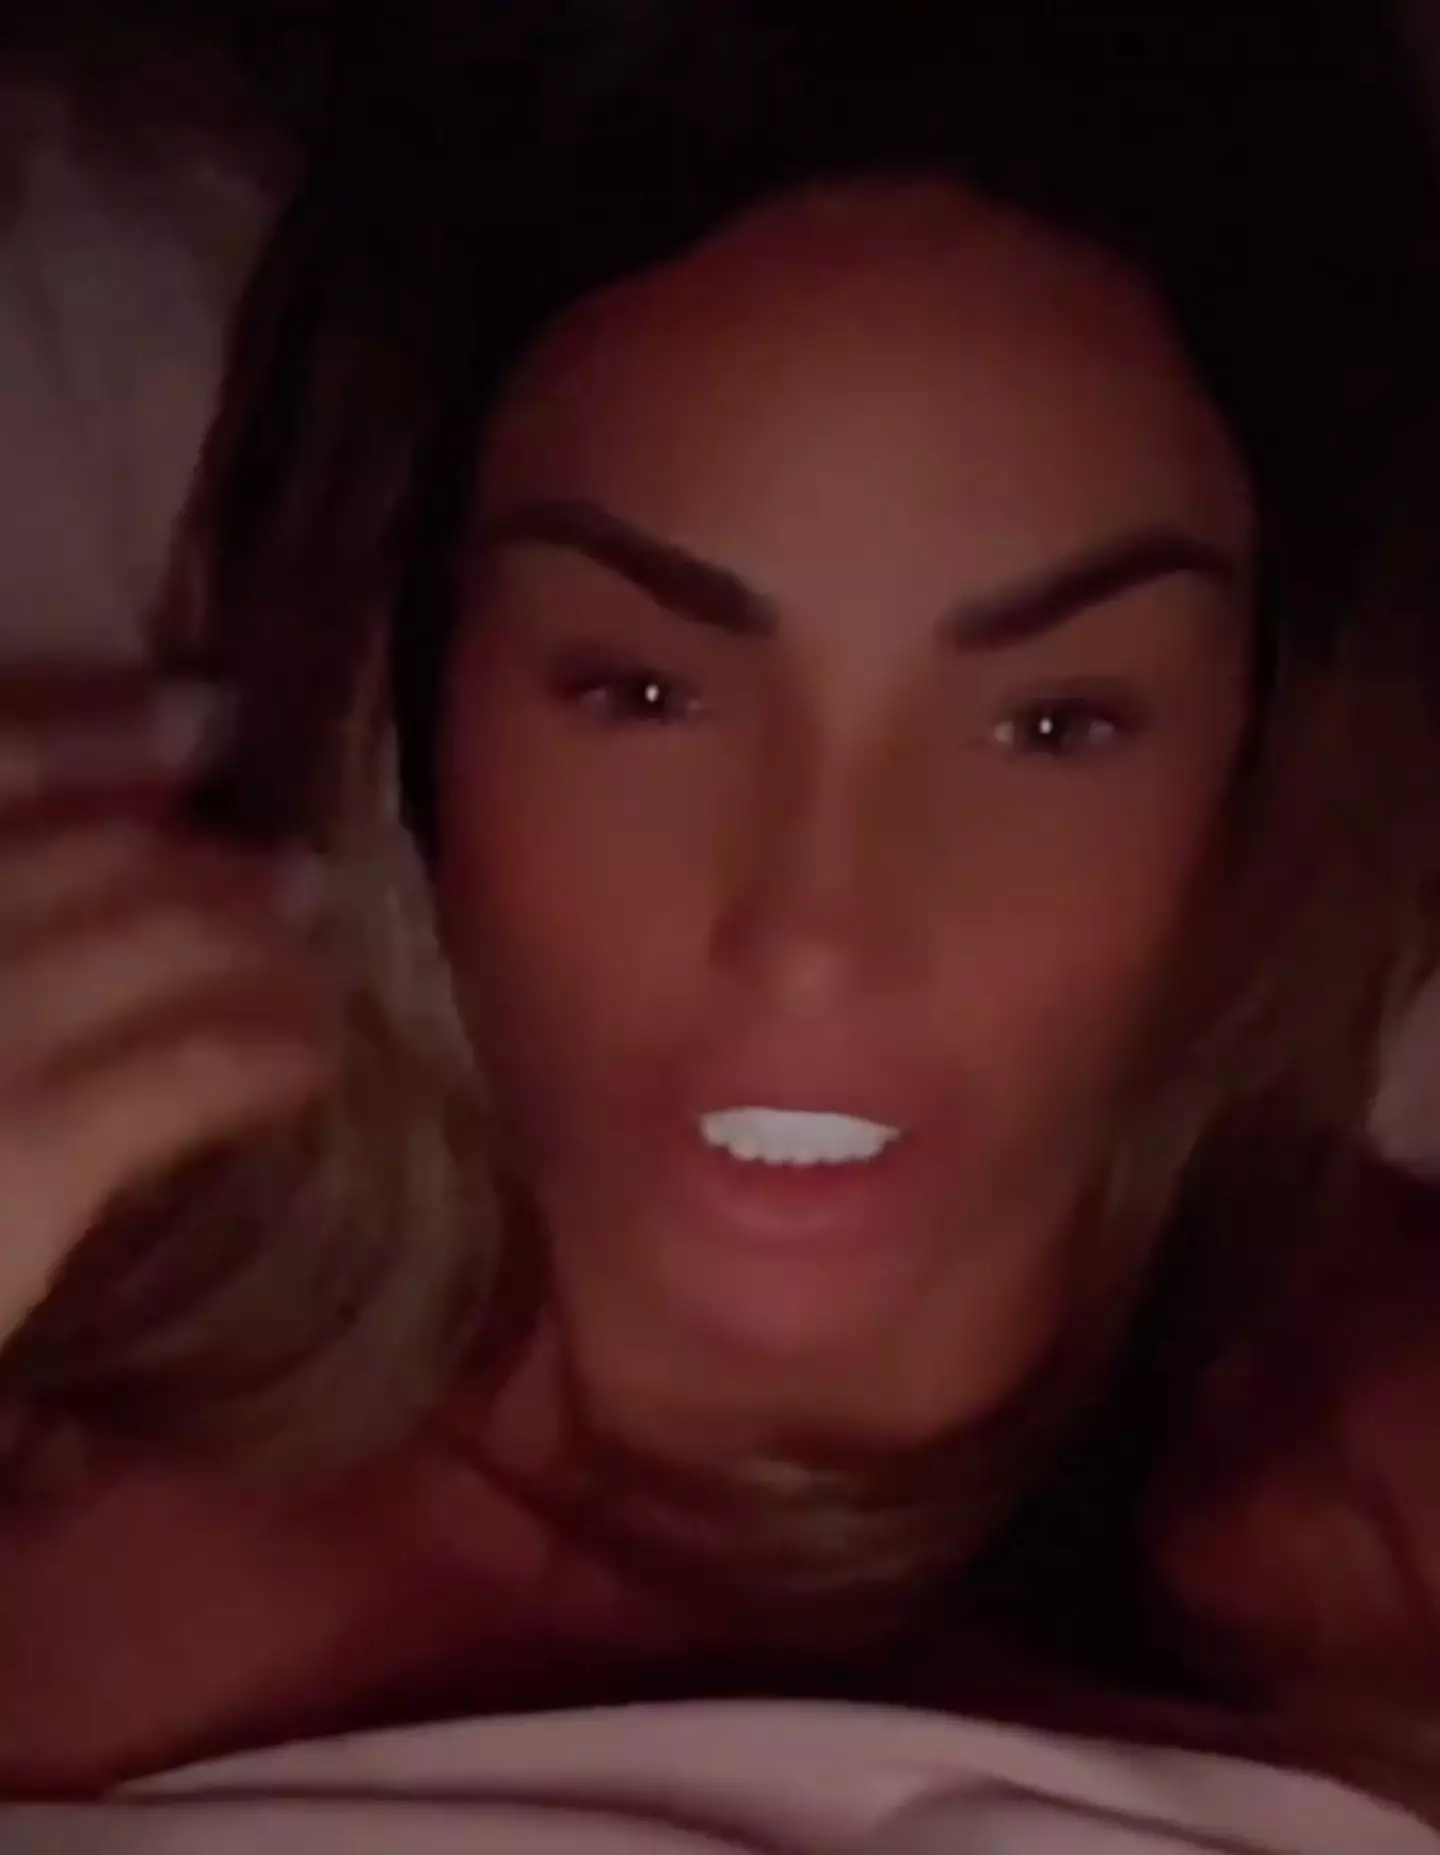 Katie Price has been criticised over a video she shared over Christmas.